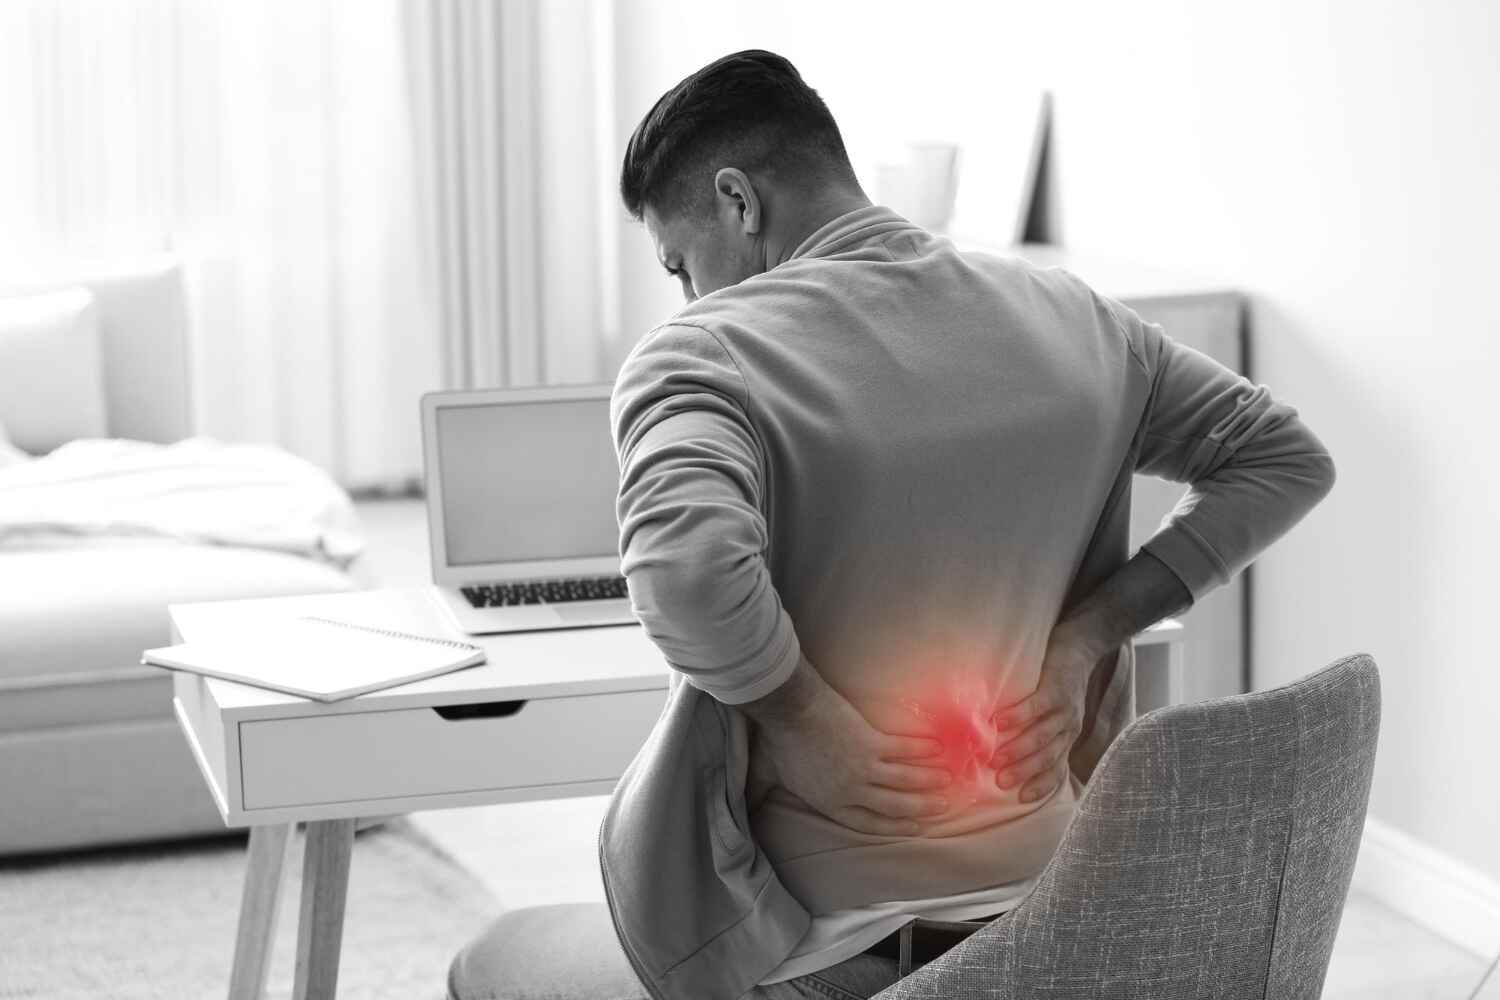 How do I know if my back pain is serious? Dr. Sumitz's back pain treatment clinic is here to help